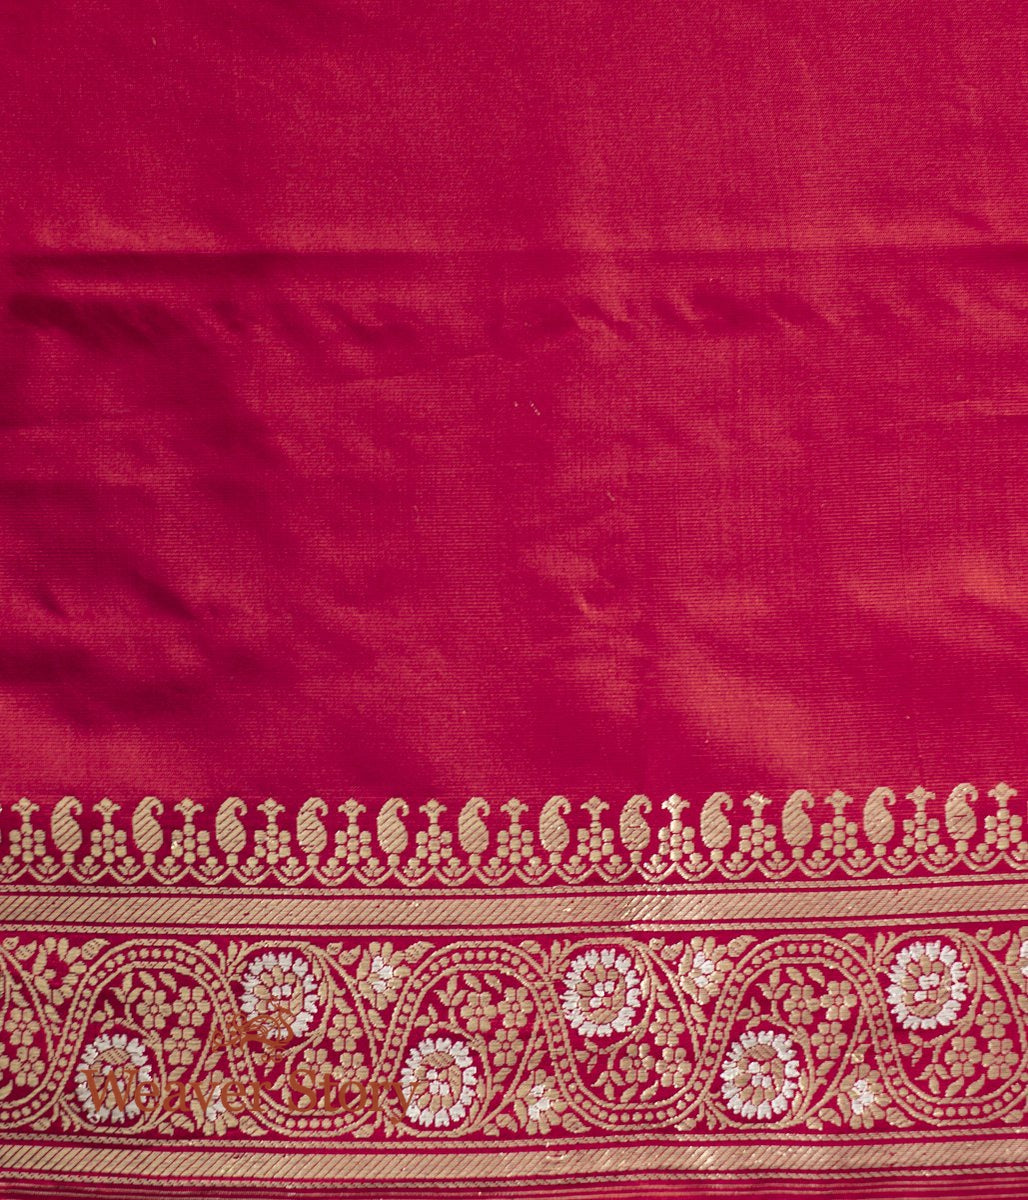 Handwoven_Red_Plain_Saree_with_Gold_and_Silver_Meenakri_Border_WeaverStory_05